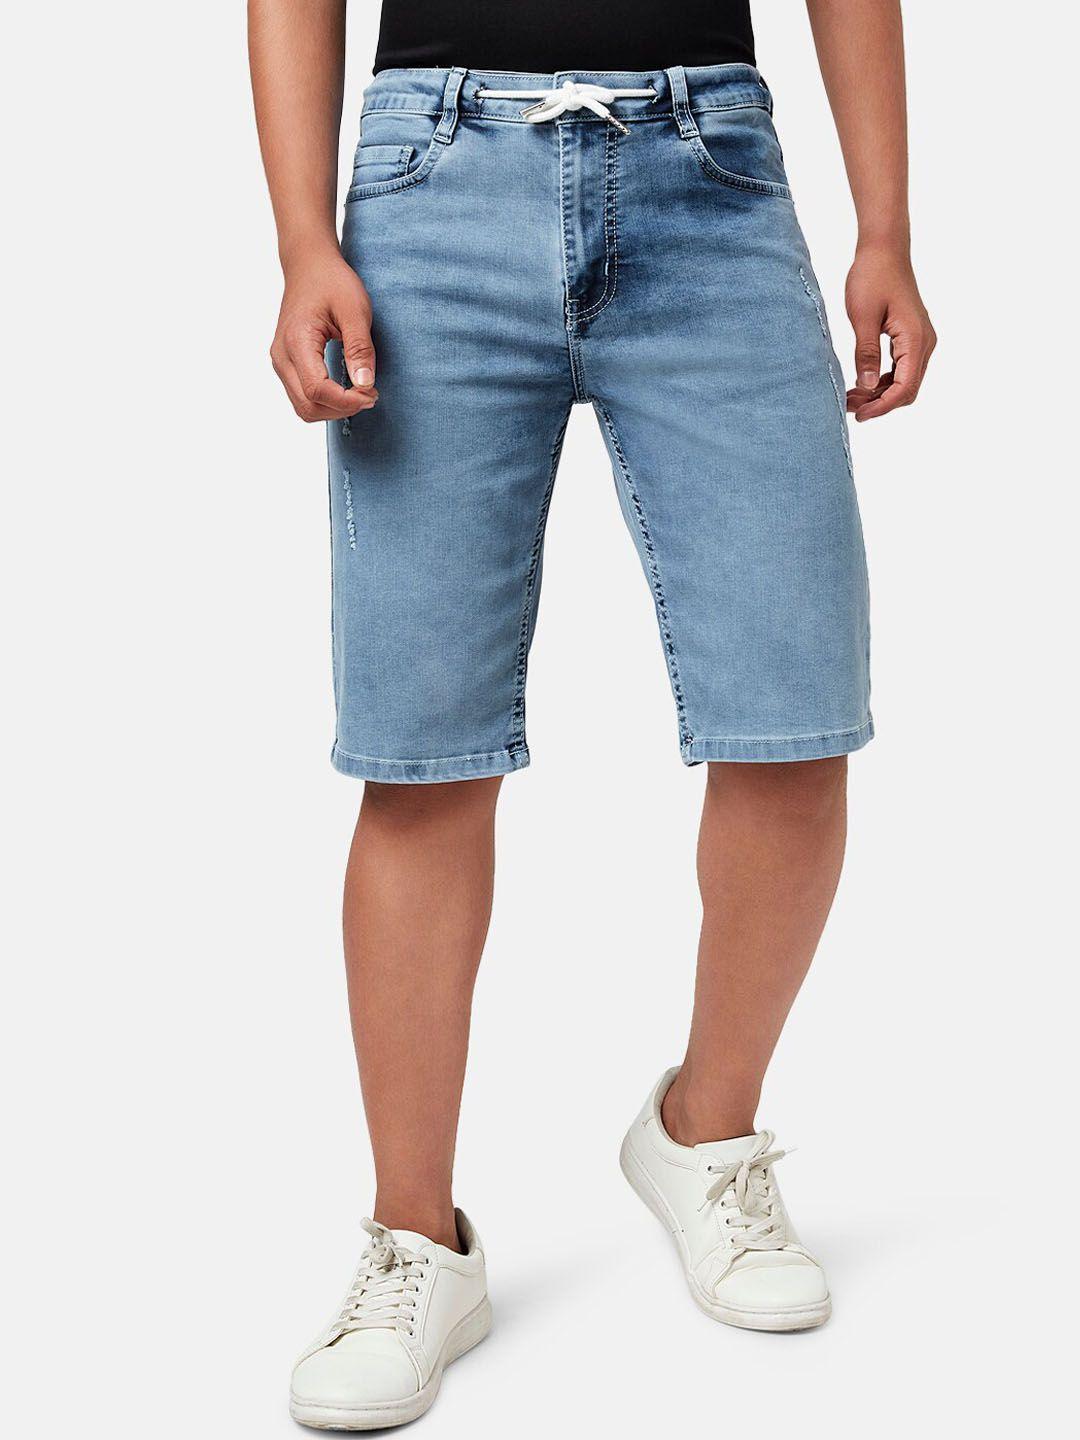 coolsters by pantaloons boys cotton denim shorts